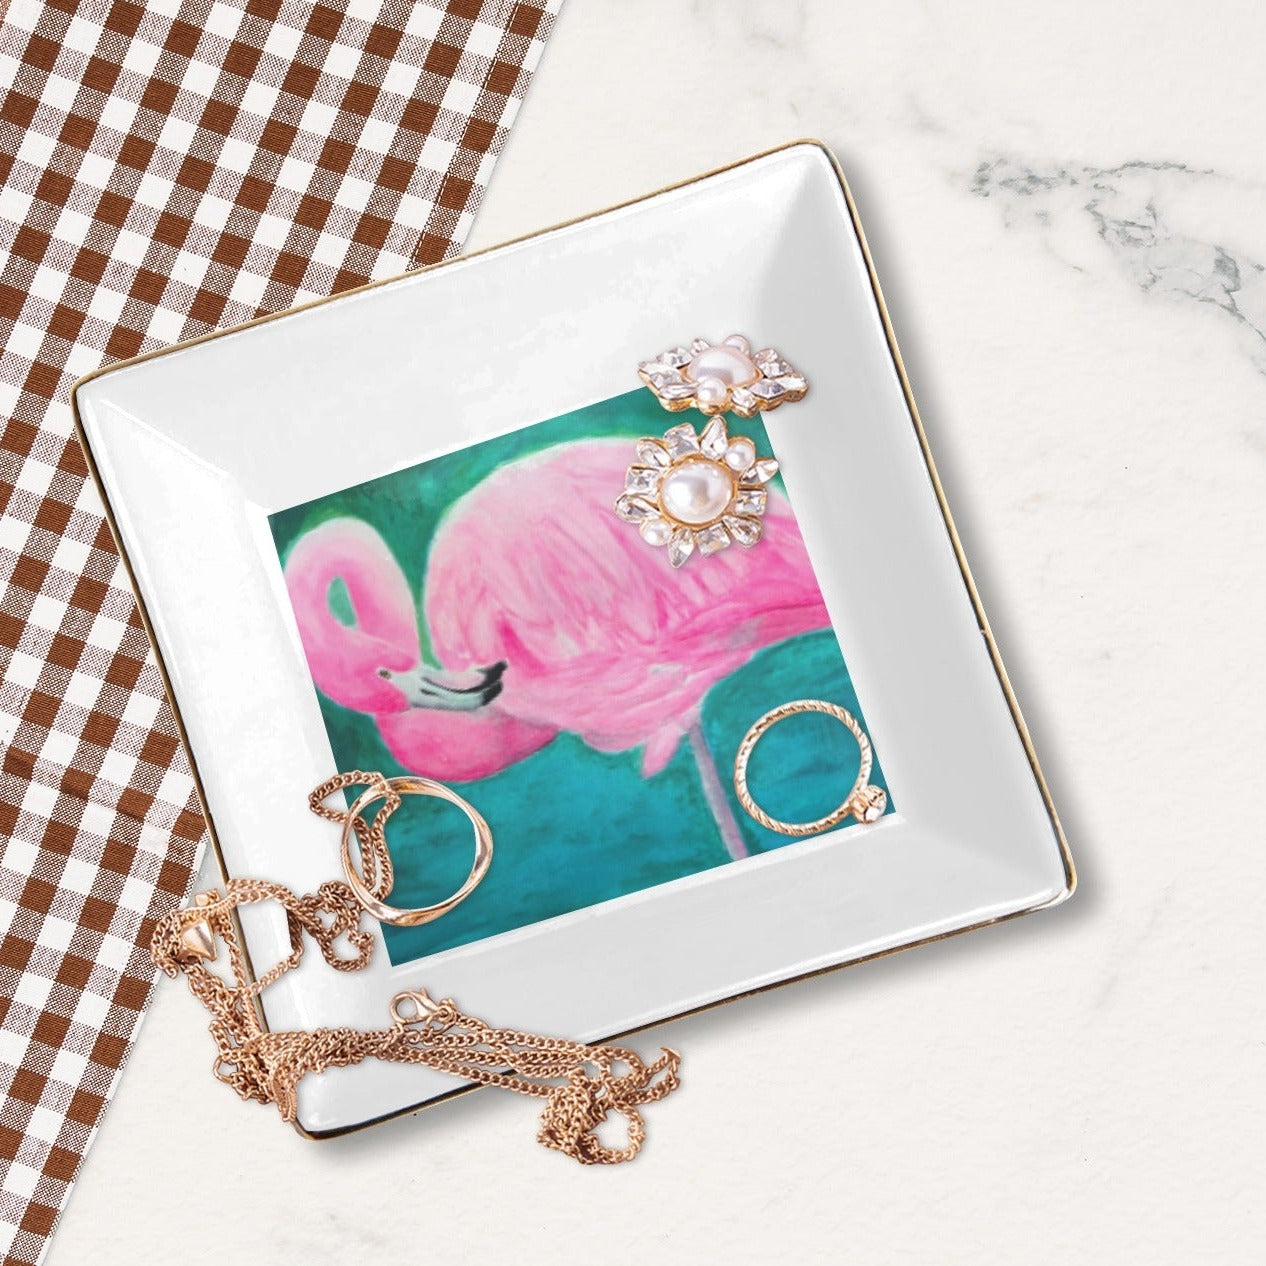 Beautiful Flamingo Square Jewelry Tray with Golden Edge